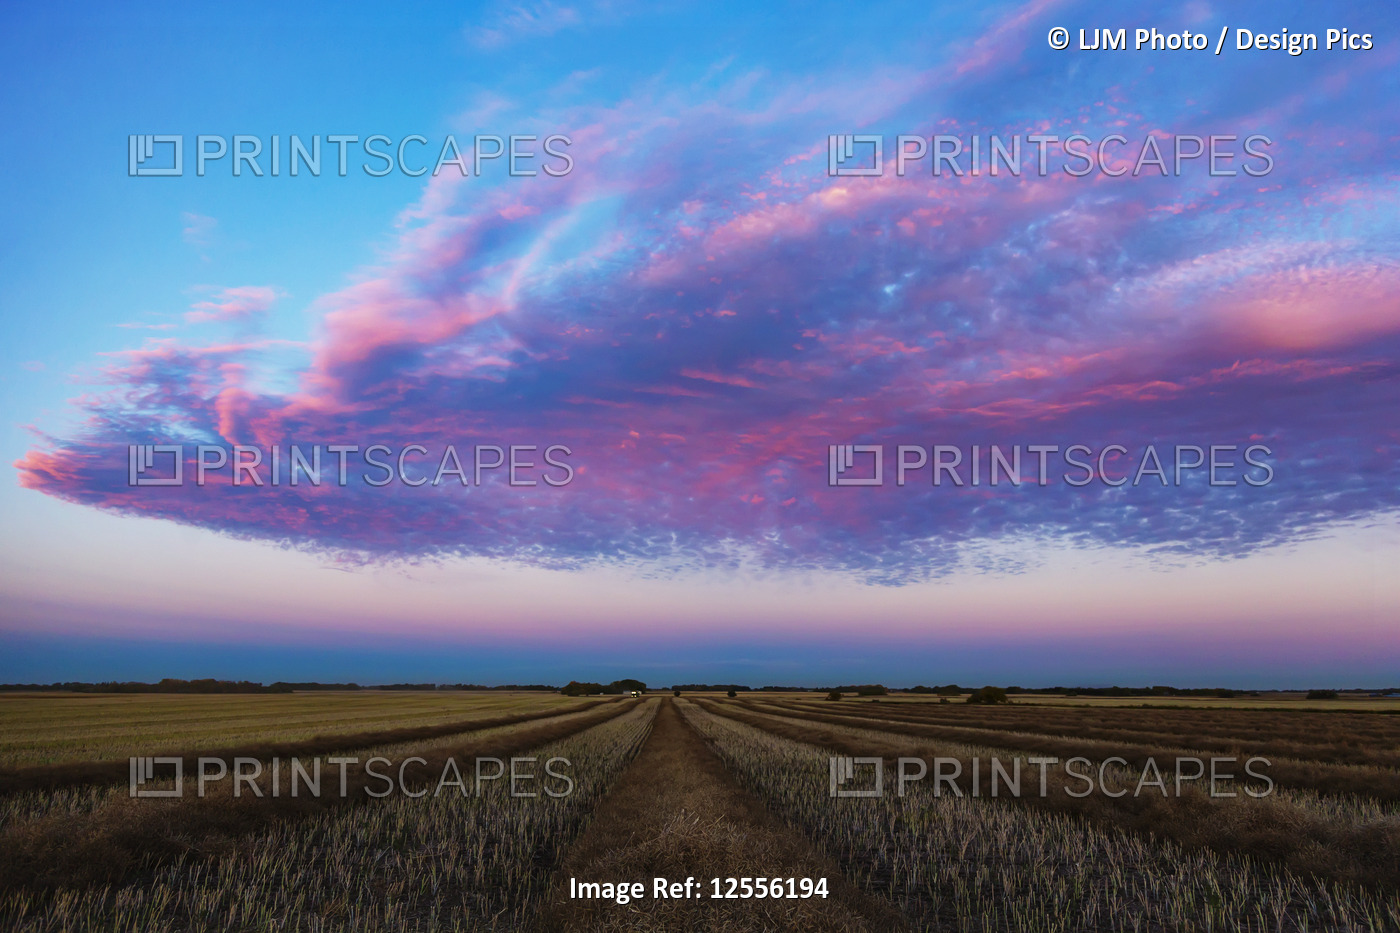 Swathed canola field at sunset with glowing pink clouds; Legal, Alberta, Canada